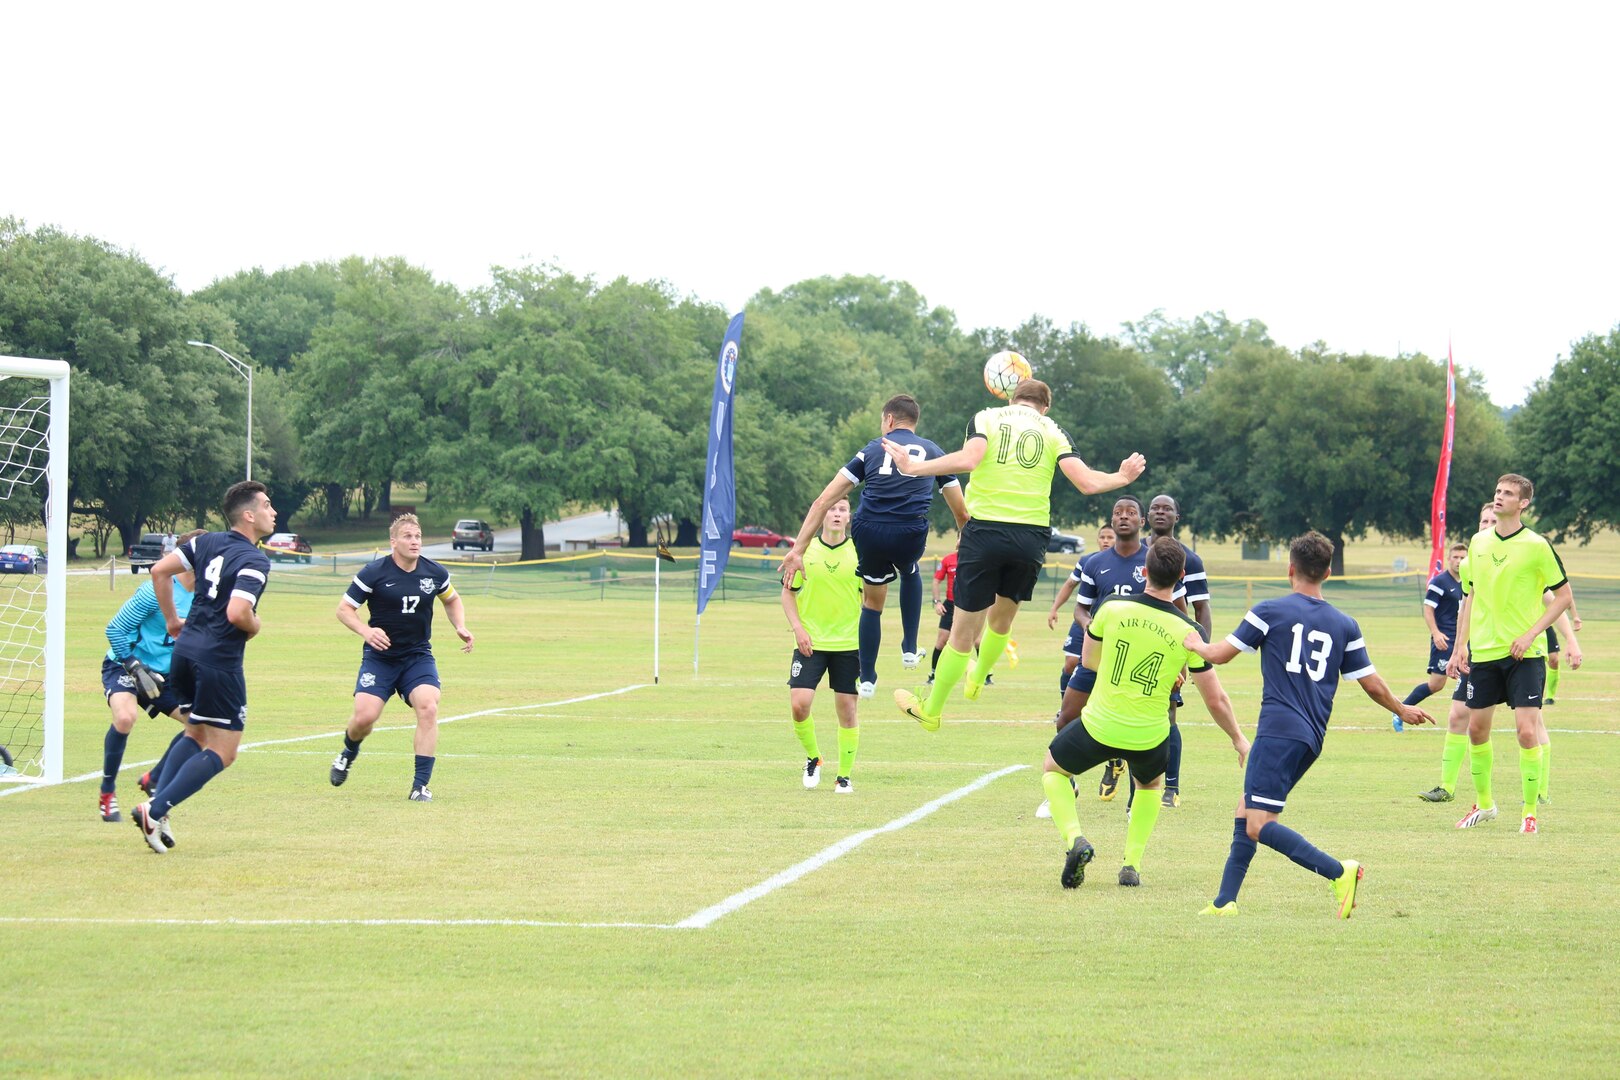 The Navy defends the final barrage of shots to defeat Air Force 1-0 in the 2016 Armed Forces Men's Soccer Championship at Fort Benning, Ga. The 2016 Championship is held from 6 to 14 May featuring teams from the Army, Marine Corps, Navy and Air Force.  Coast Guard personnel are competing on the Navy team.  